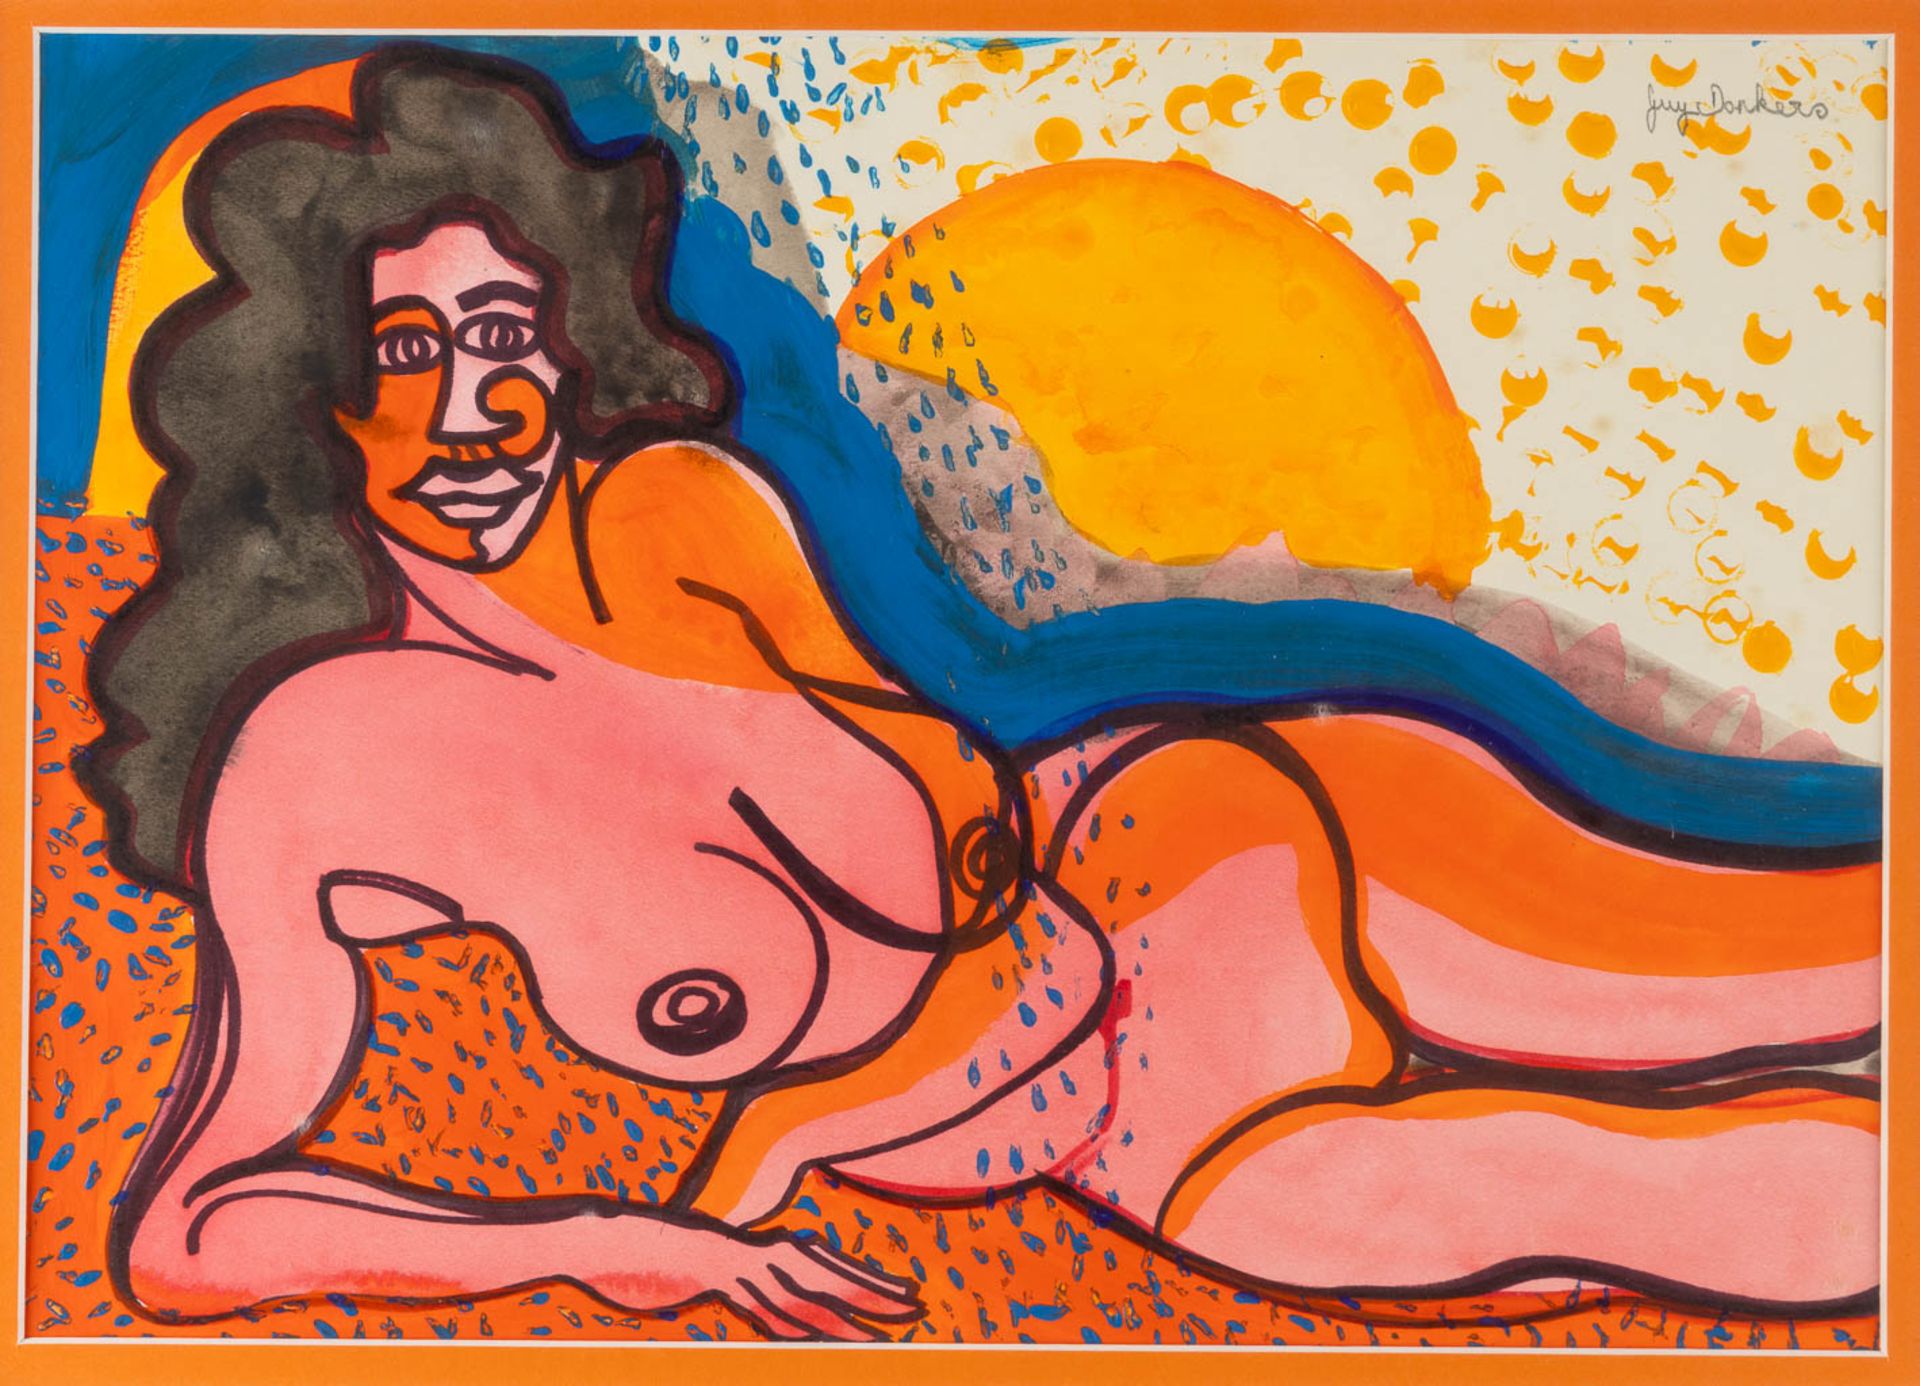 Guy DONKERS (1975) 'Nude' acrylic on paper. (W:41 x H:29 cm)